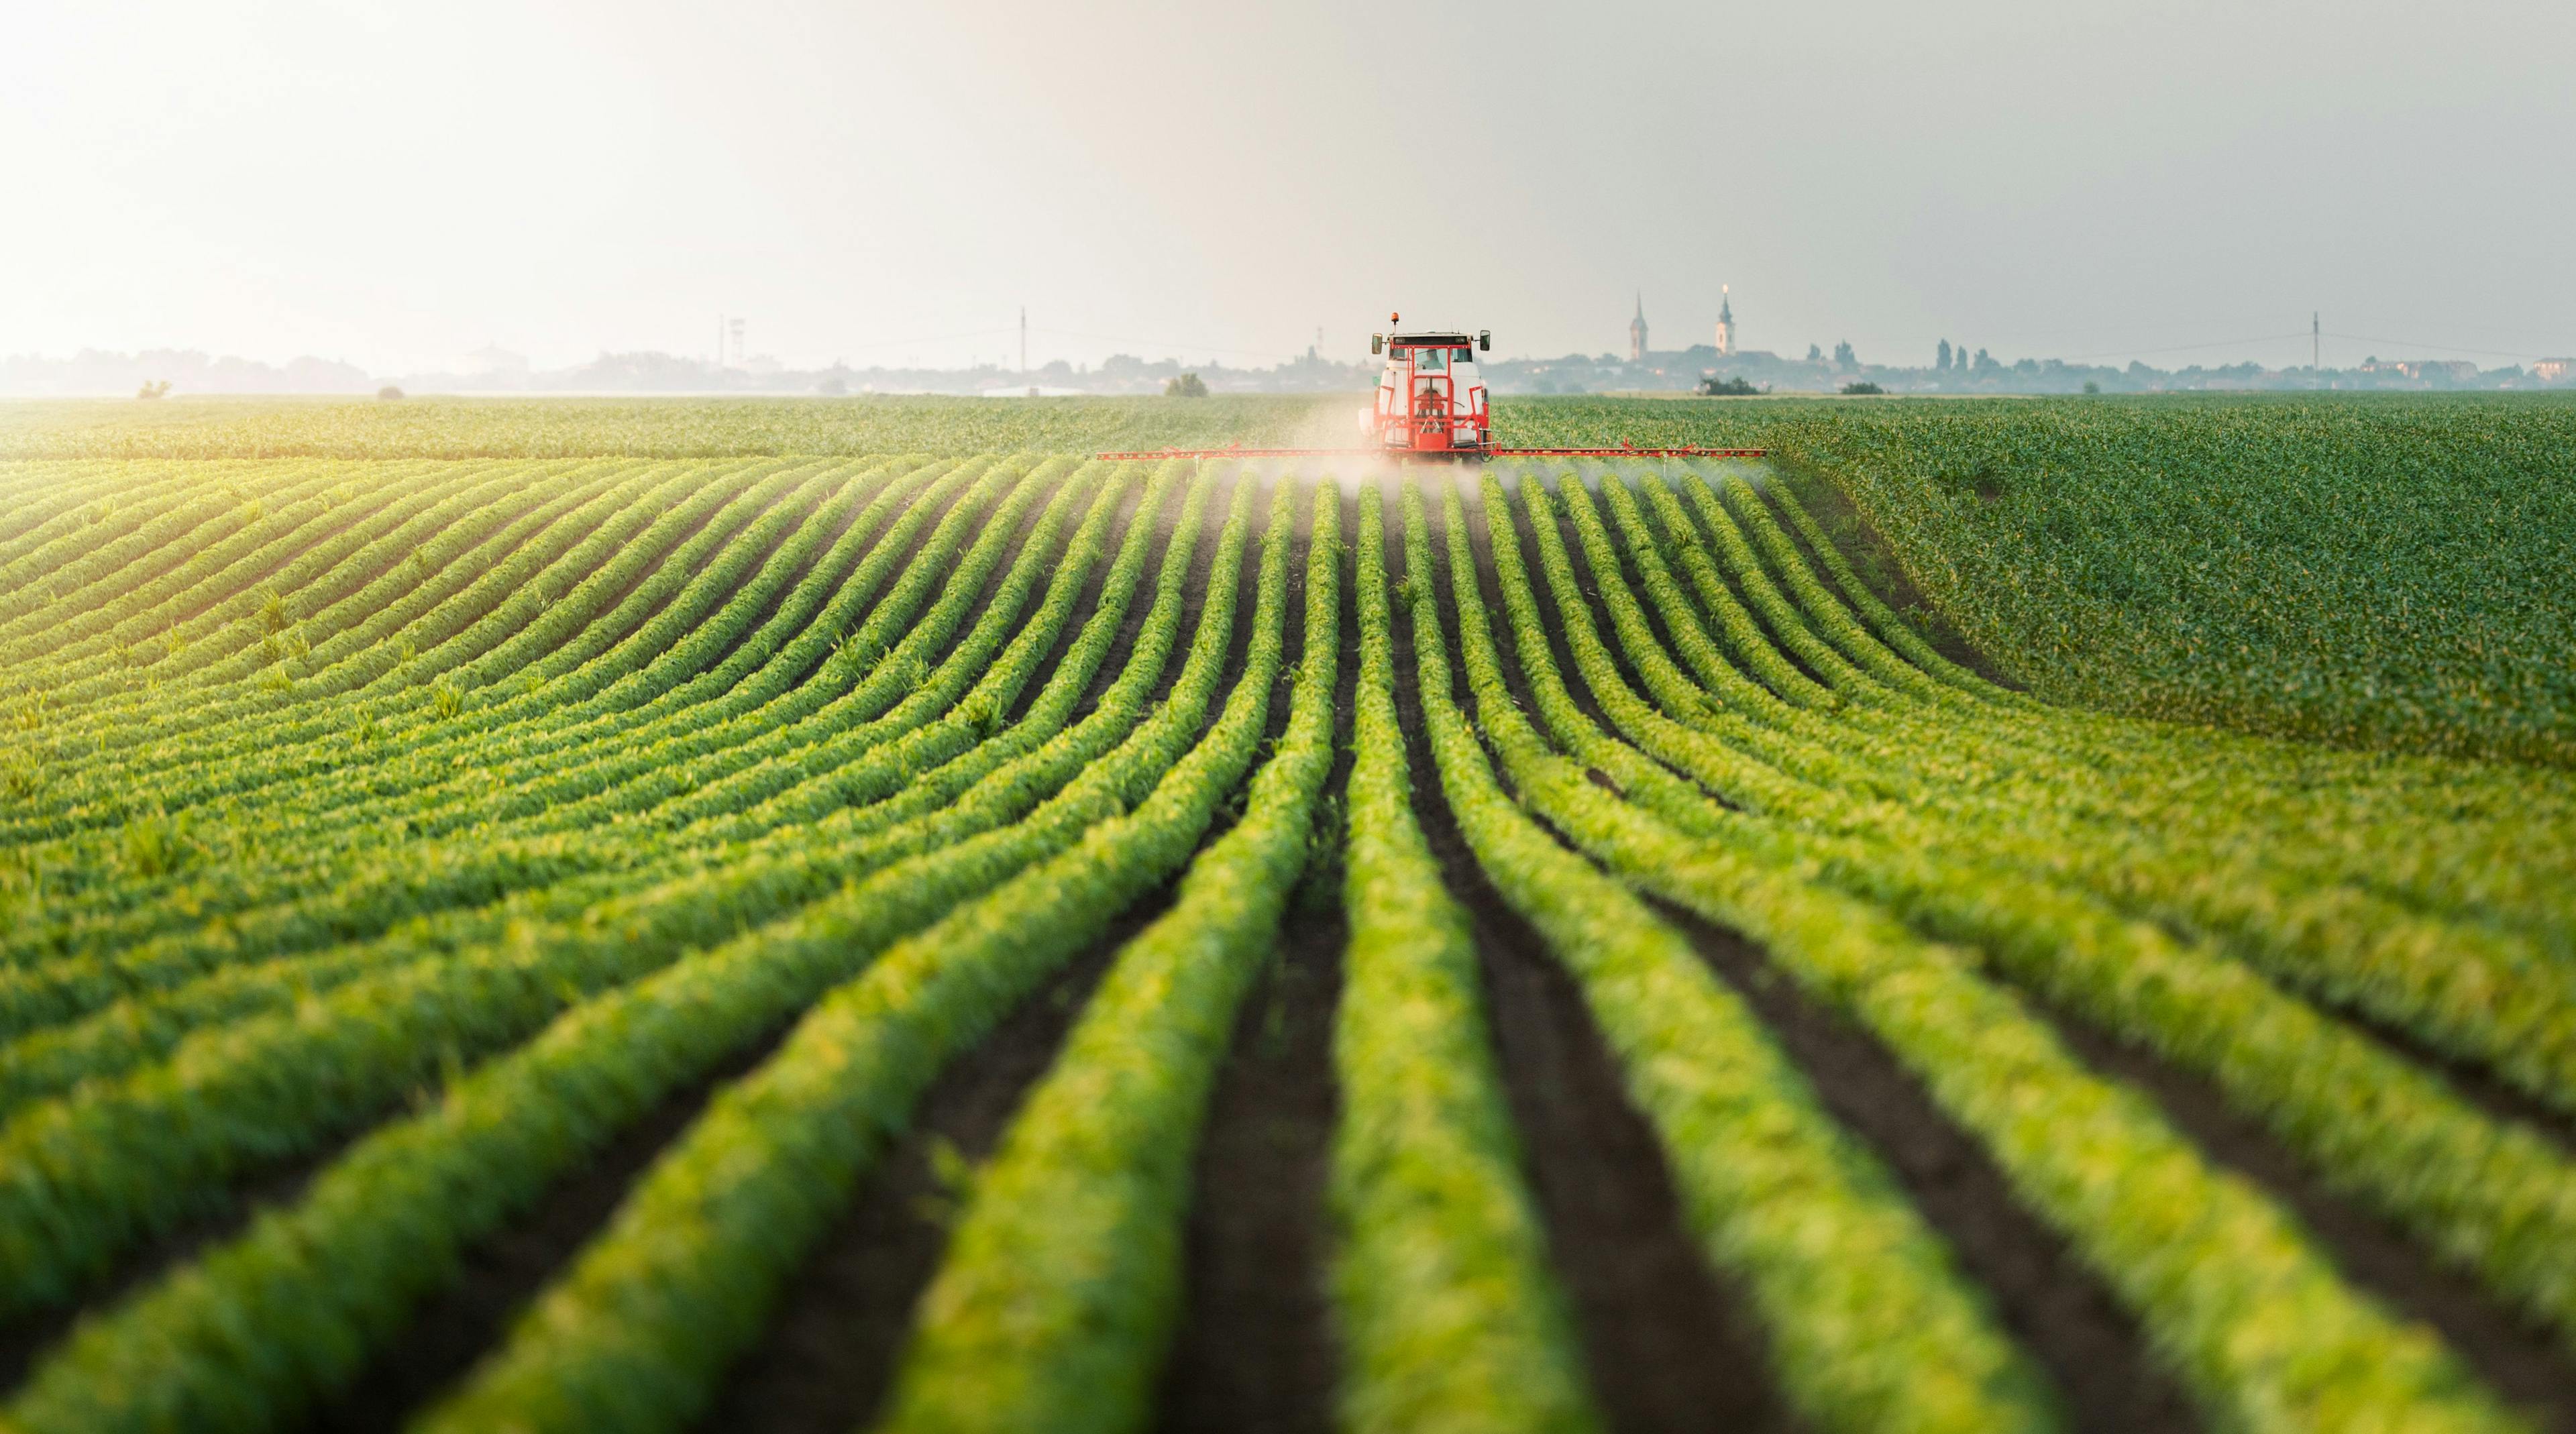 Tractor spraying pesticides at soy bean field | Image Credit: © Dusan Kostic - stock.adobe.com.